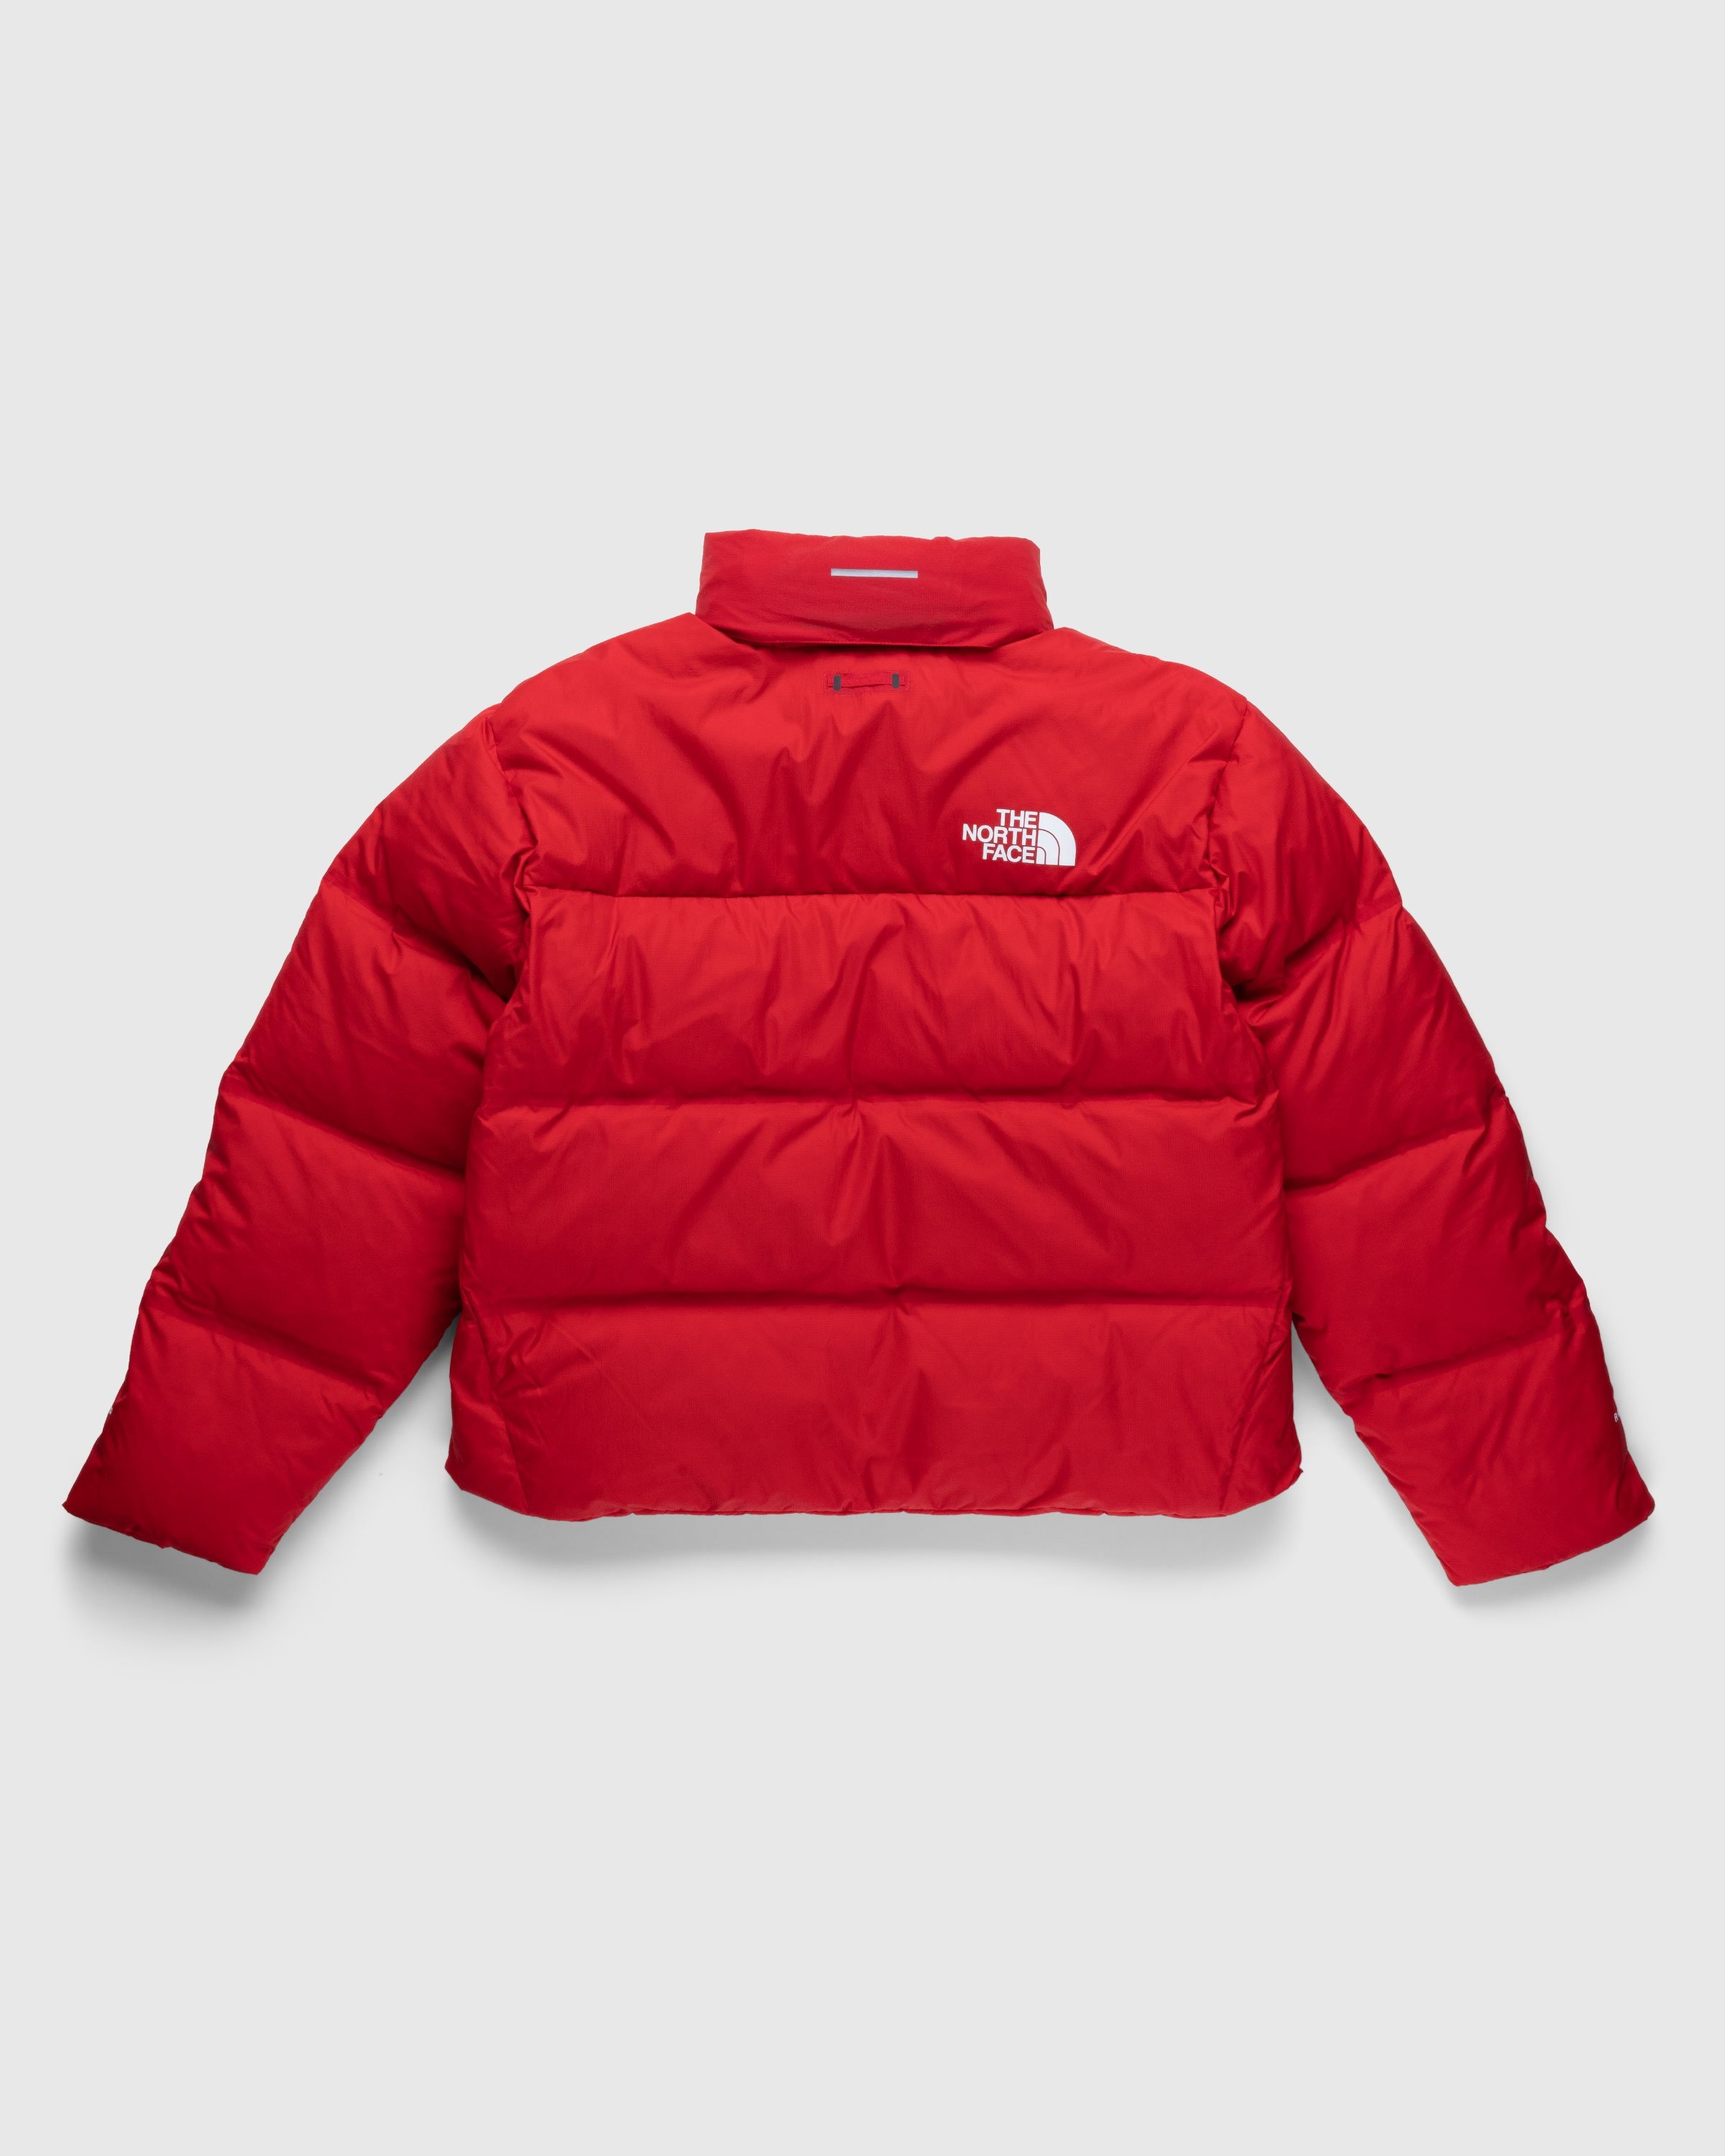 The North Face – Rmst Nuptse Jacket Red - Outerwear - Red - Image 2